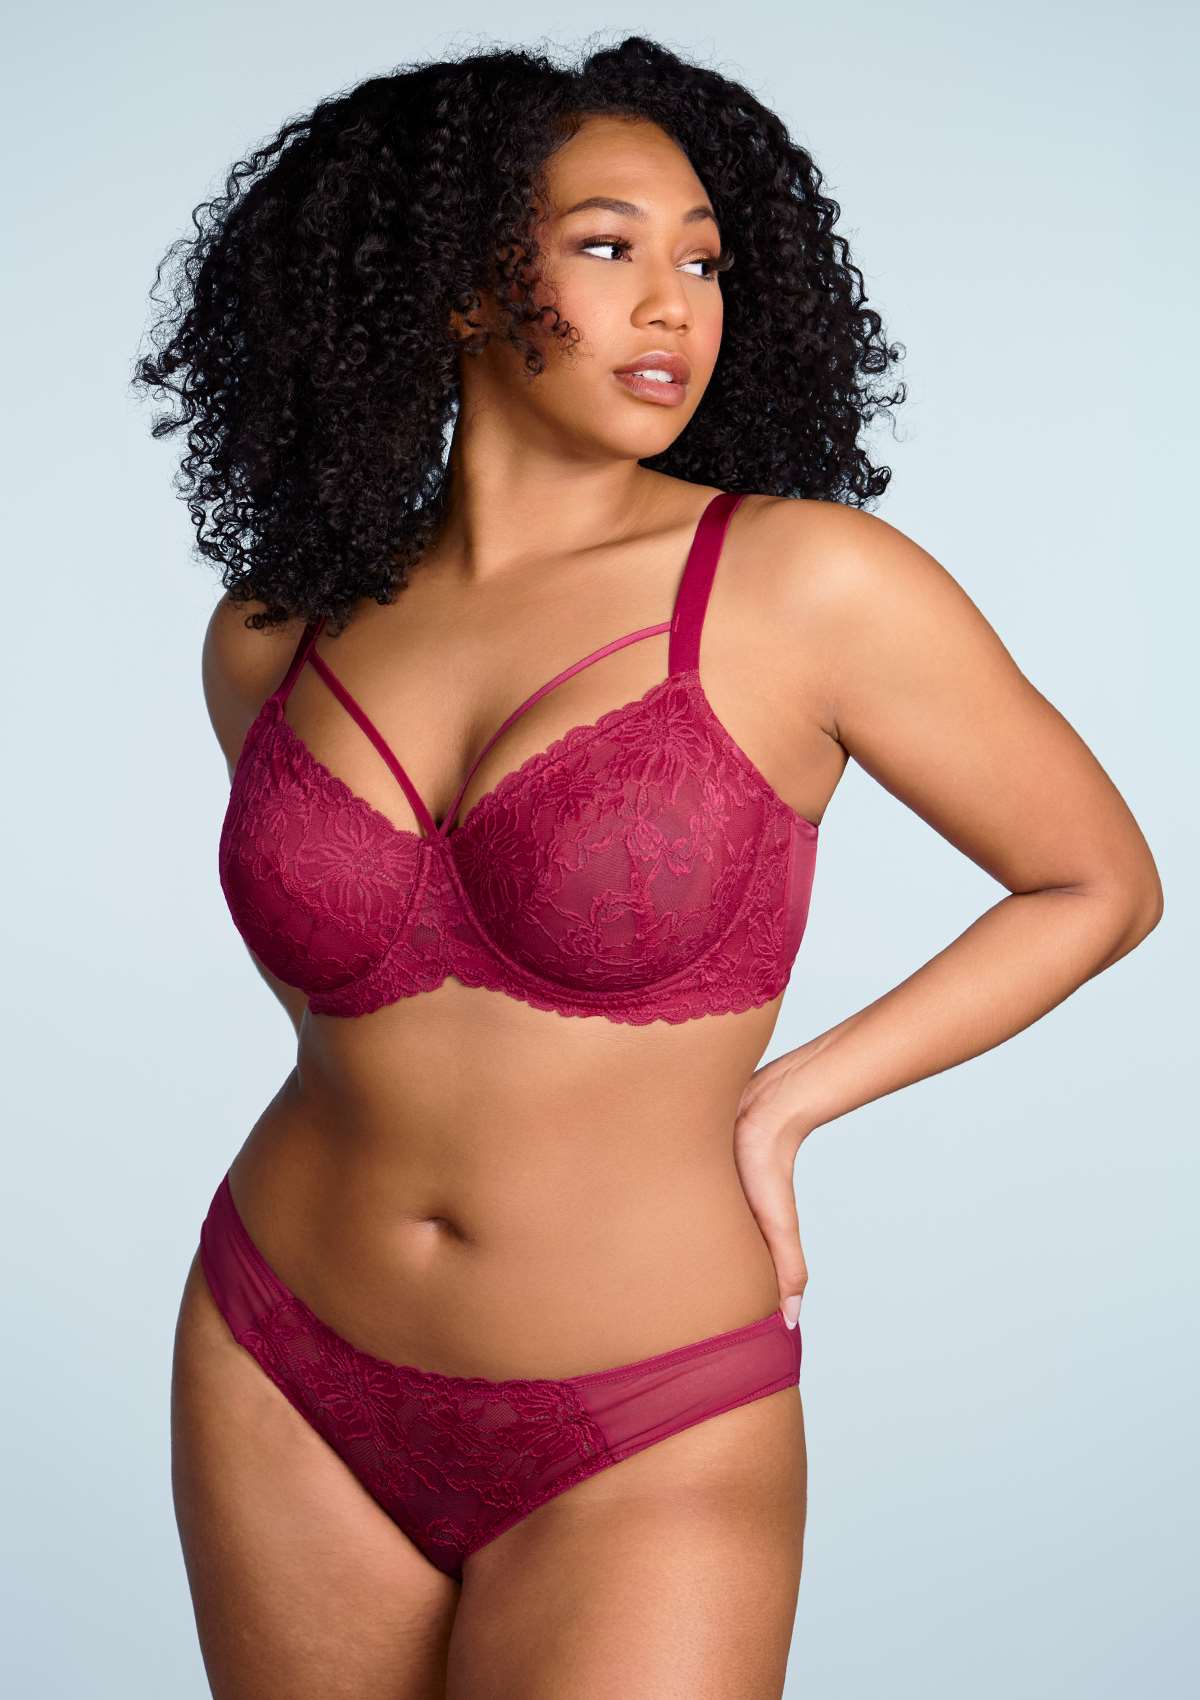 HSIA Pretty In Petals Lace Panties And Bra Set: Plus Size Women Bra - Red / 38 / B